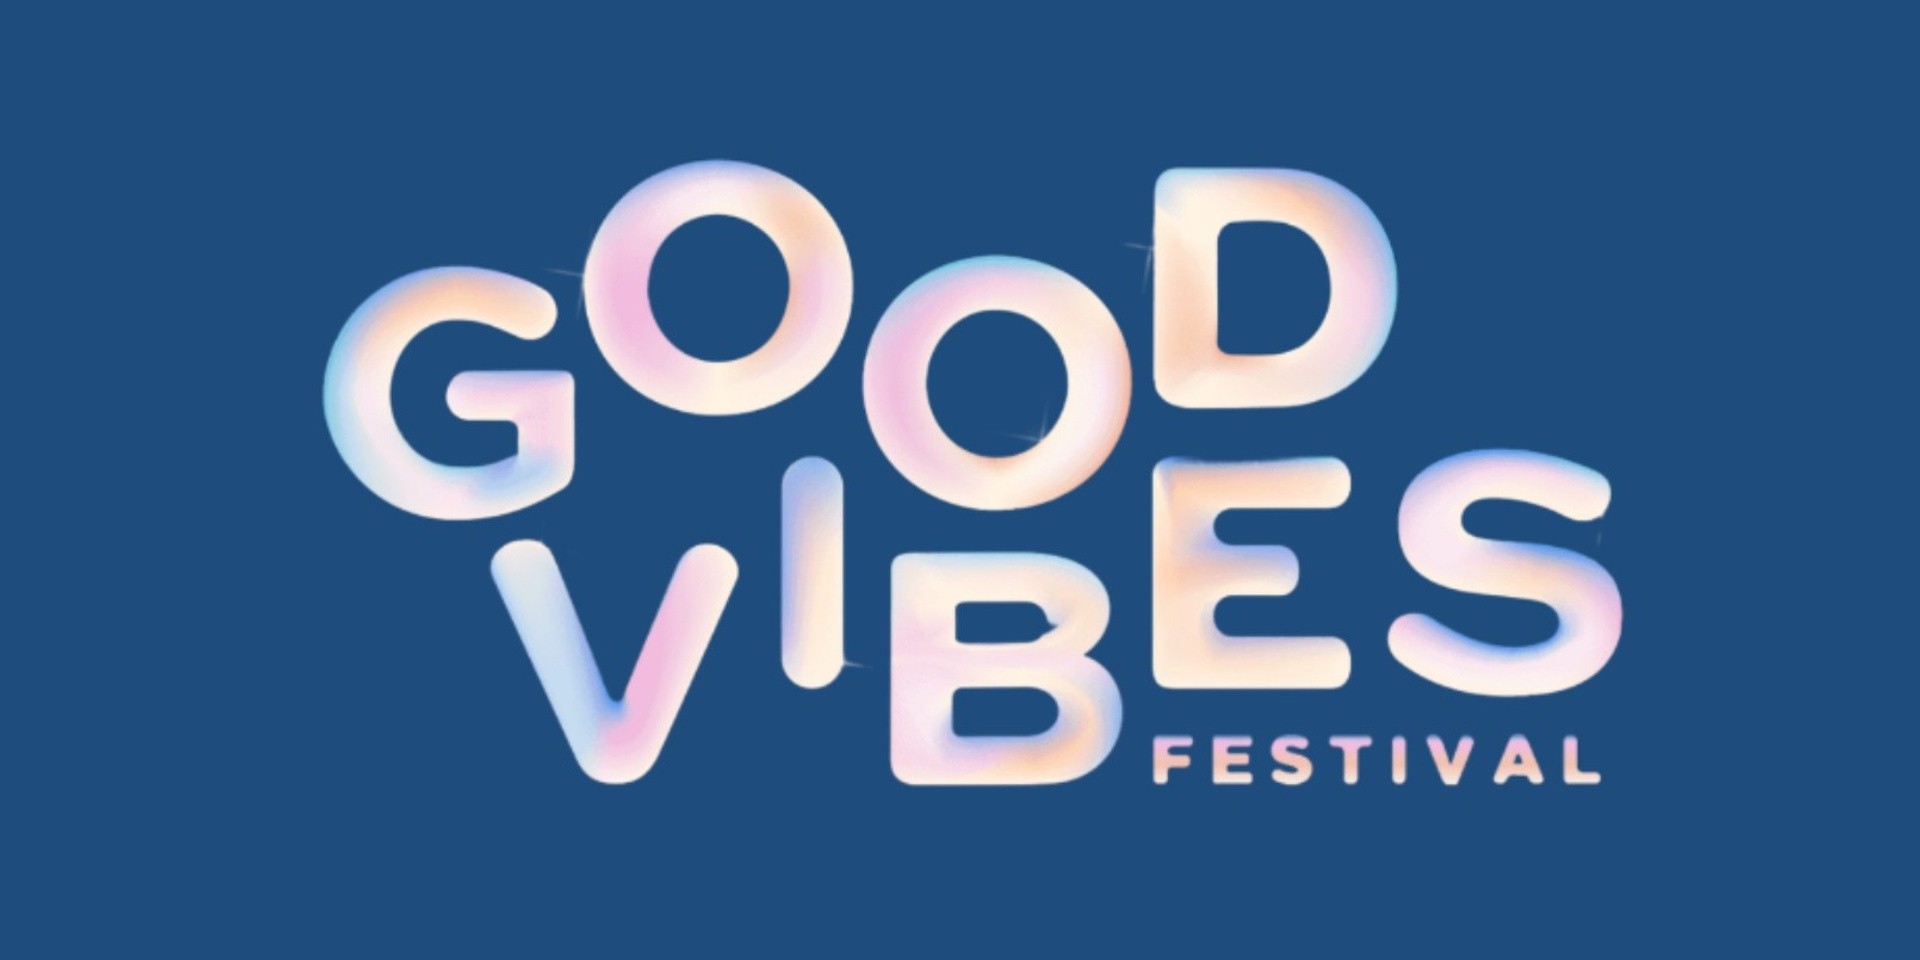 Good Vibes Festival 2023 has been cancelled following the